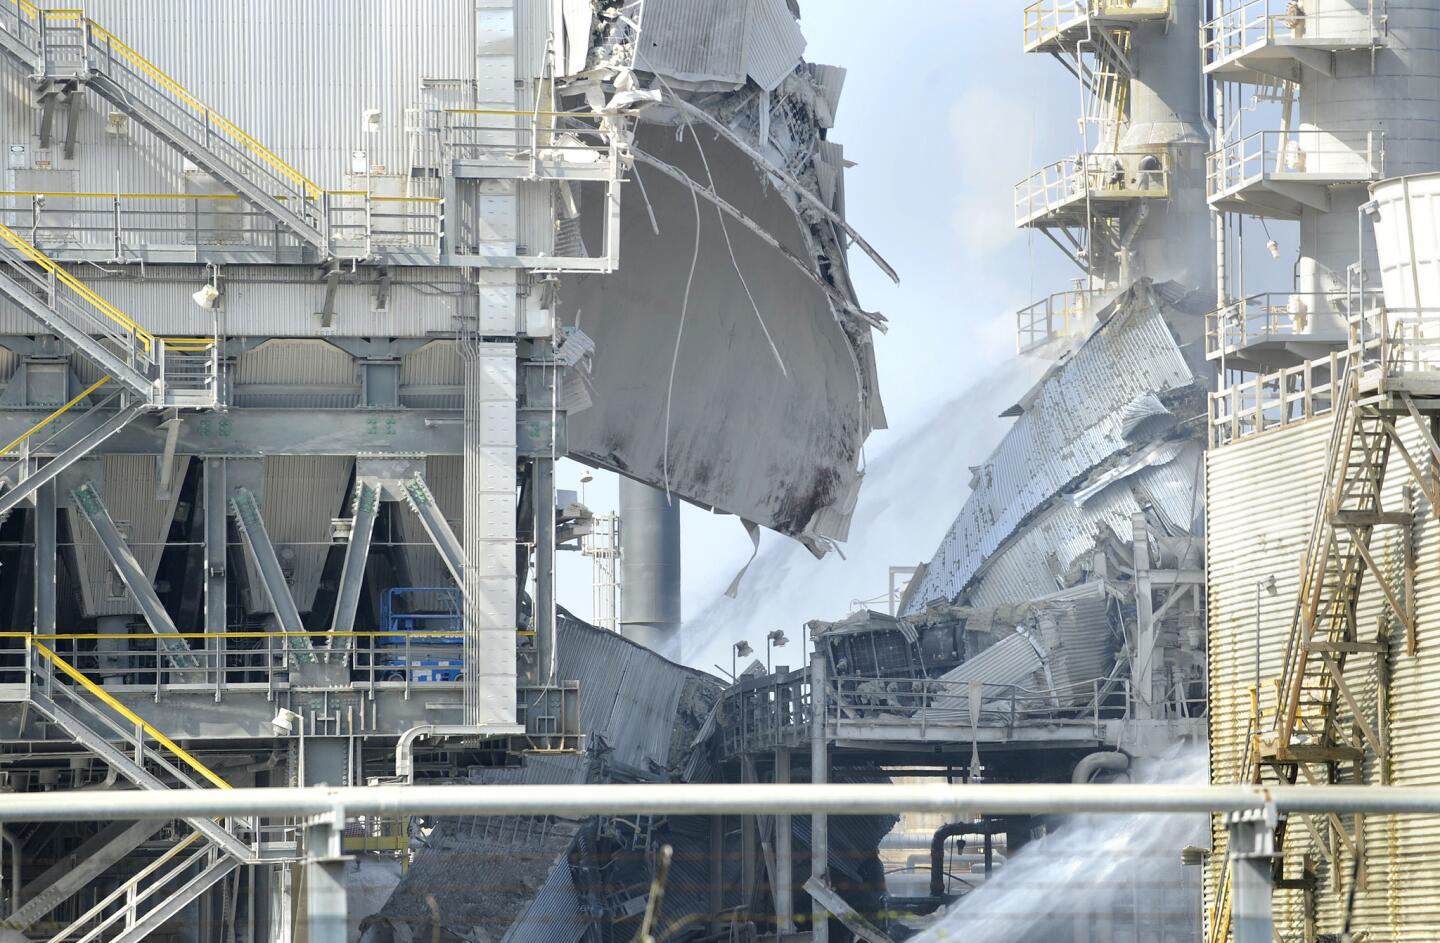 Damage caused by an explosion at the Exxon Mobil refinery in Torrance.